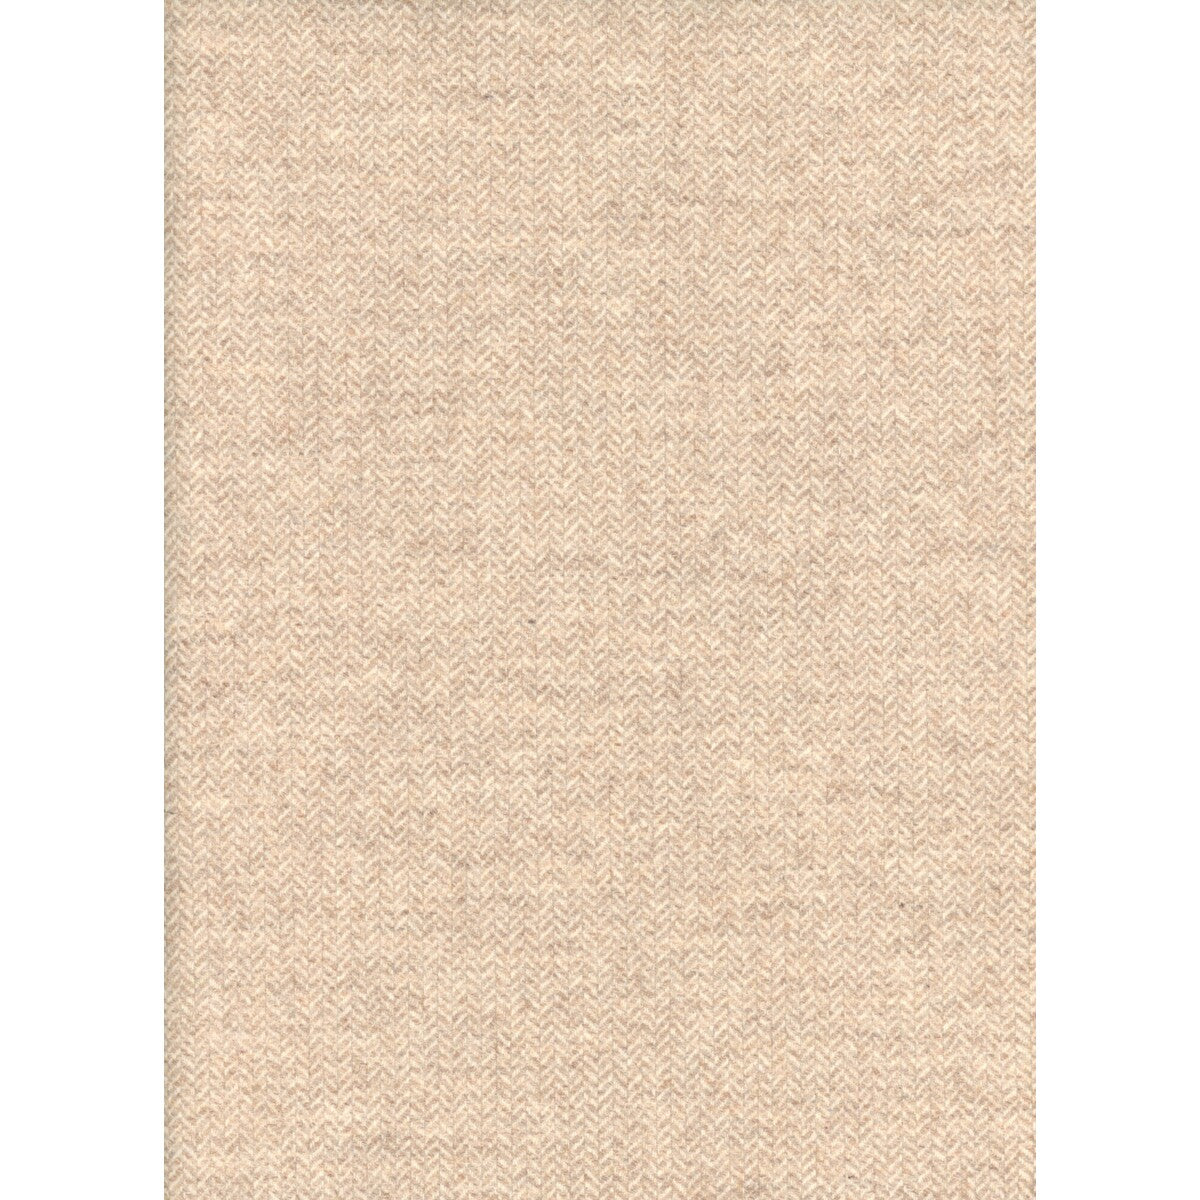 Wessex fabric in camel color - pattern AM100308.16.0 - by Kravet Couture in the Andrew Martin Windsor collection